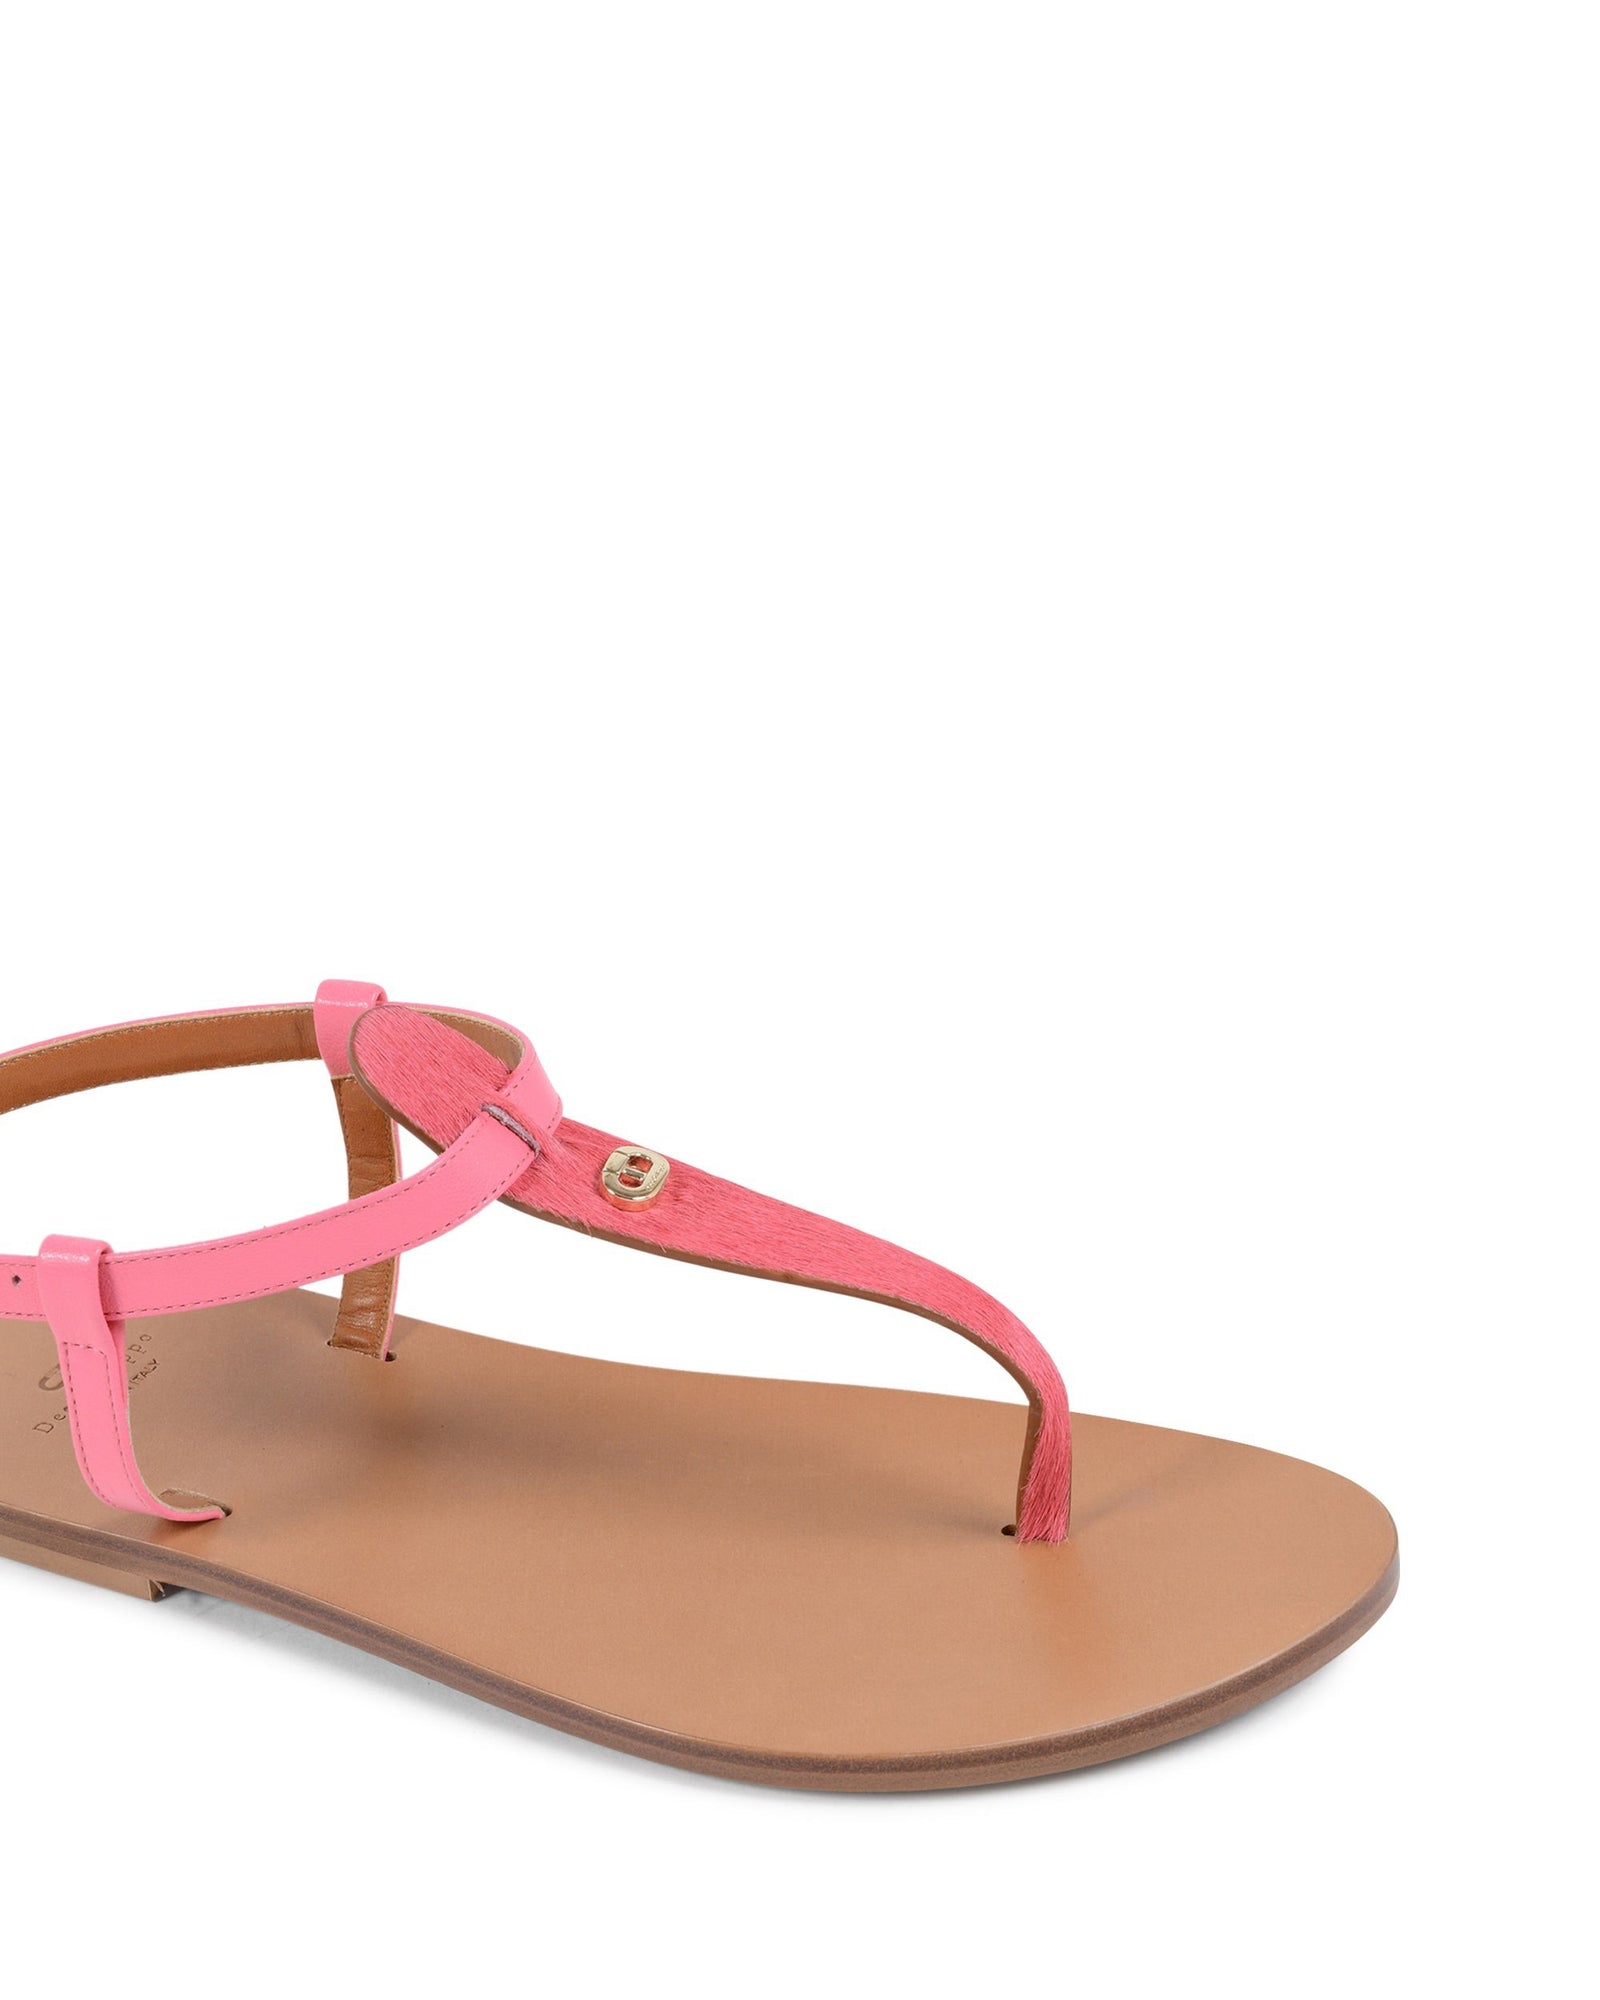 Touch The Sky Sandal Cavallino Fuxia